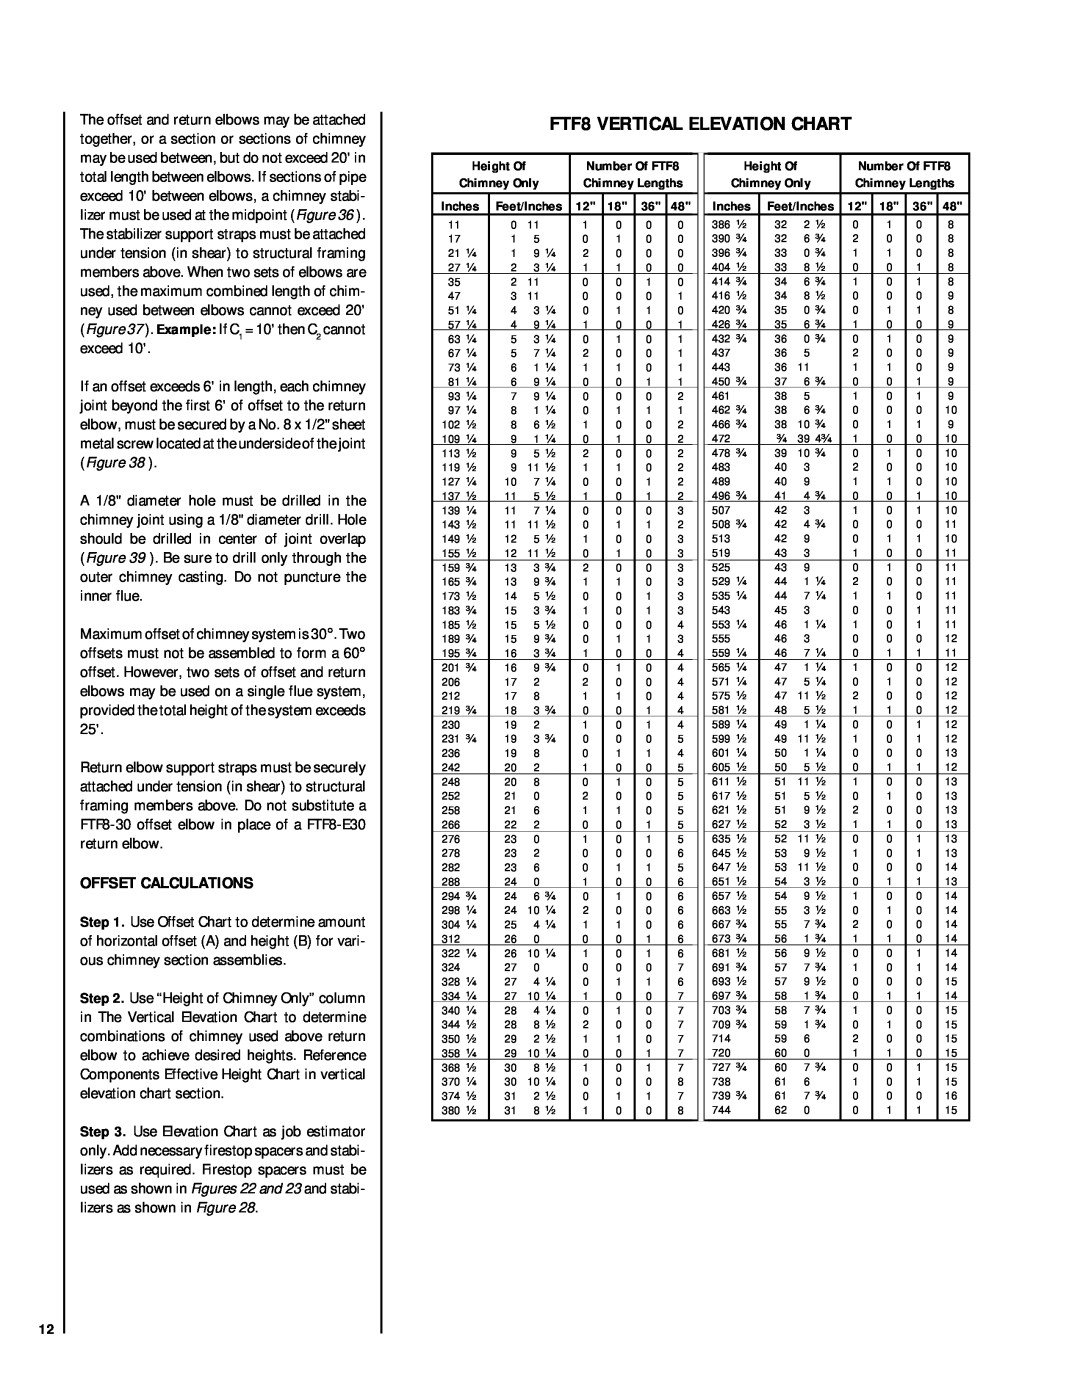 Superior BCI-36, BR-36-2, BC-36-2 installation instructions FTF8 VERTICAL ELEVATION CHART, Offset Calculations 